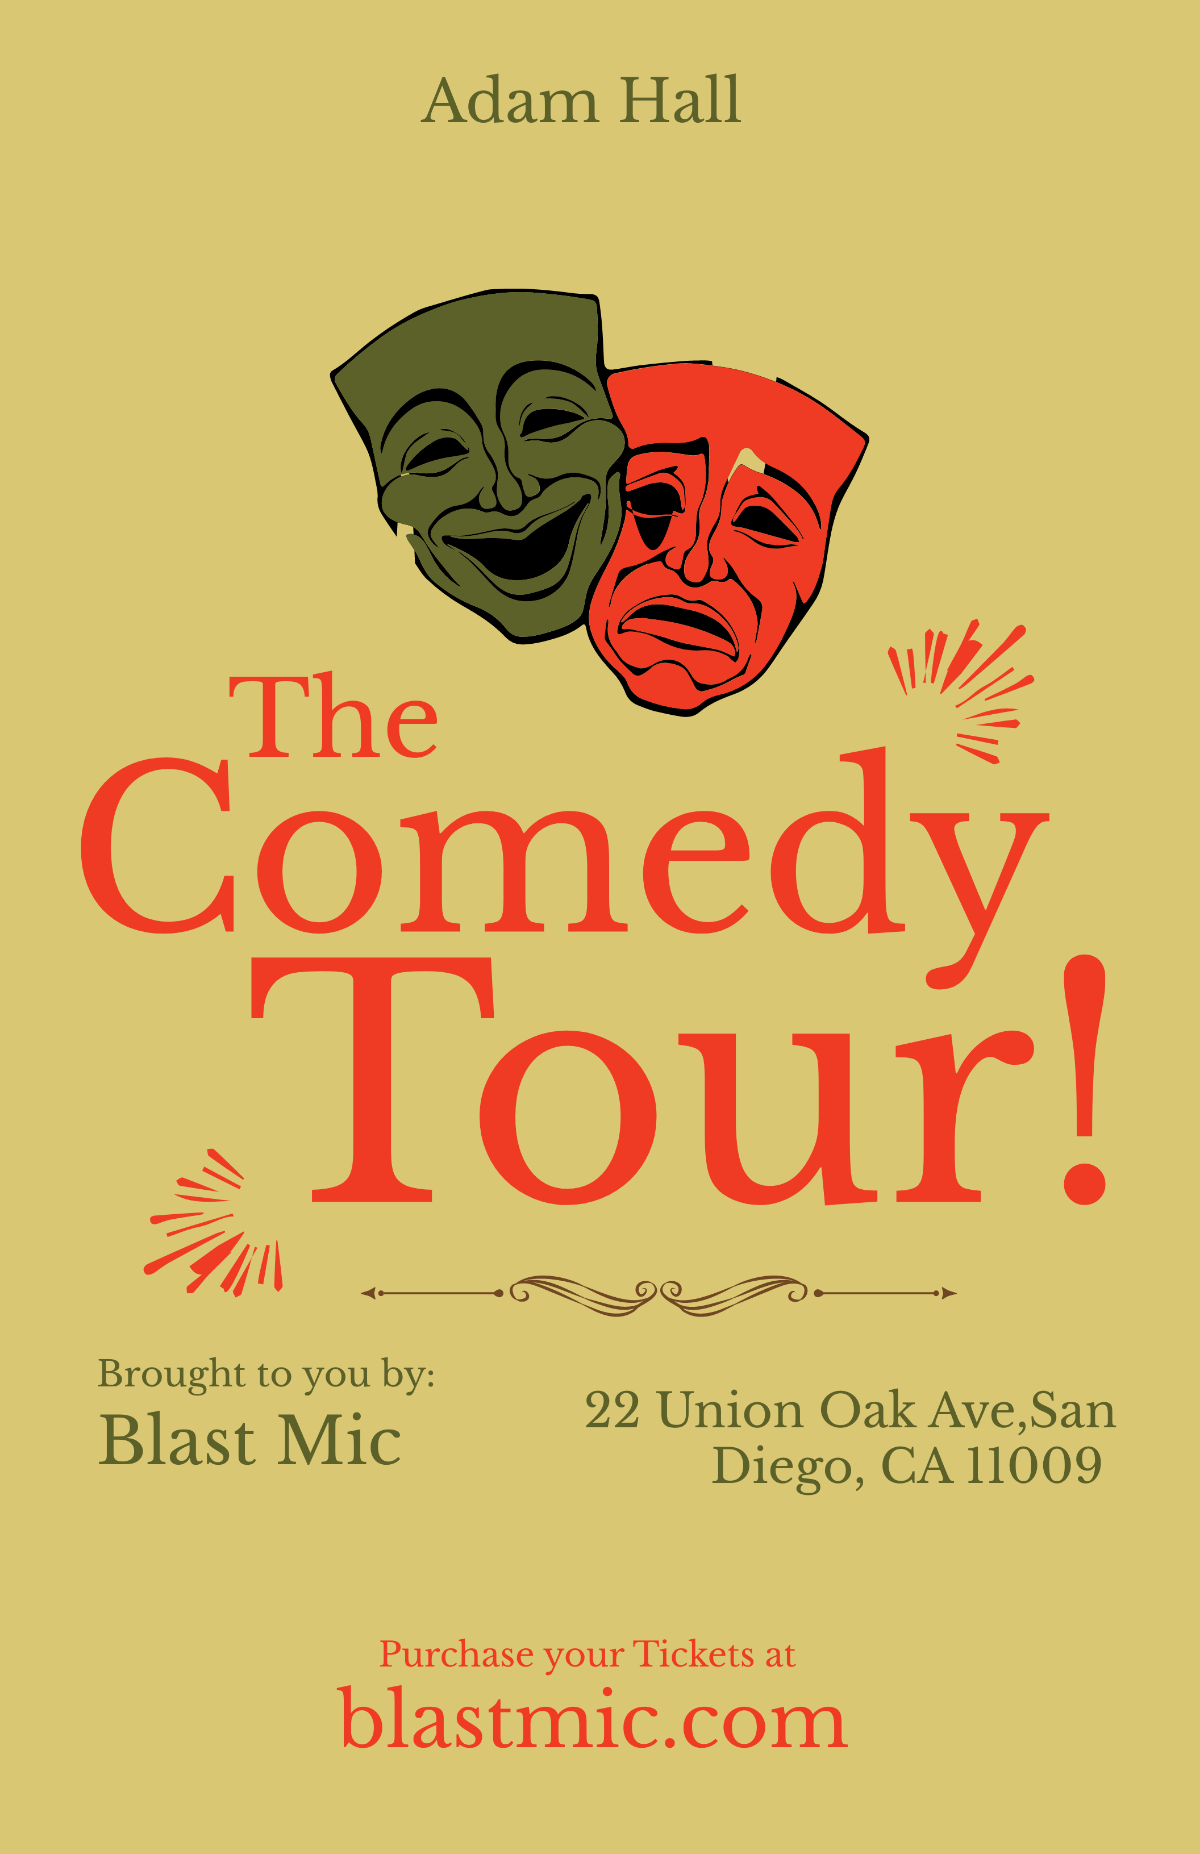 Vintage Comedy Show Poster